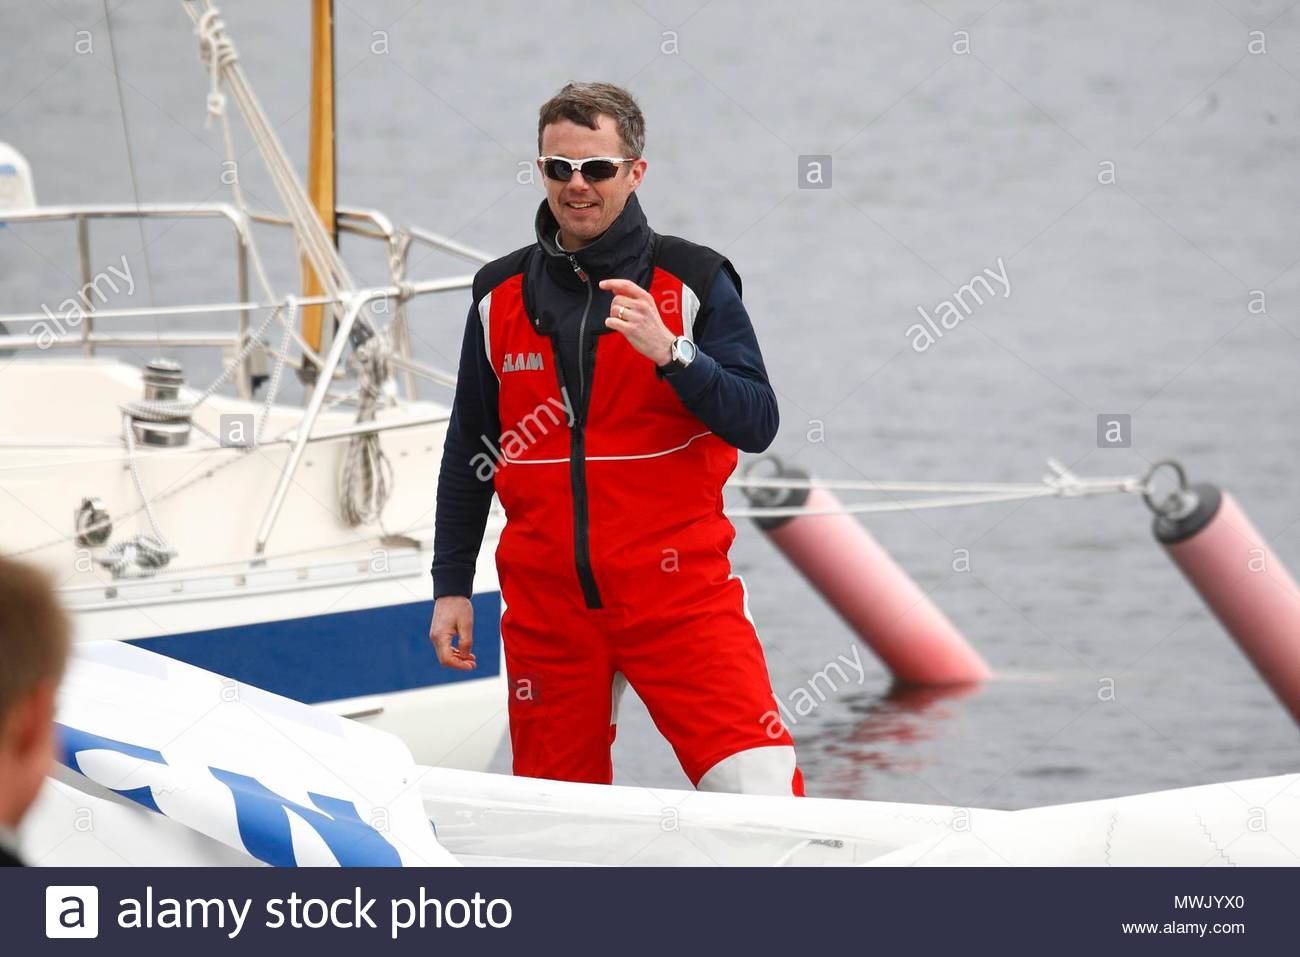 crown-prince-frederik-exclusive-no-fancy-cars-or-drivers-for-the-crown-prince-crown-prince-frederik-were-riding-the-bike-down-to-hellerup-harbour-to-attend-the-danish-championship-in-drage-sailing-may-19-2012-code-03504obj-photo-ole-bjoerkall-over-press-denmark-MWJYX0.jpg